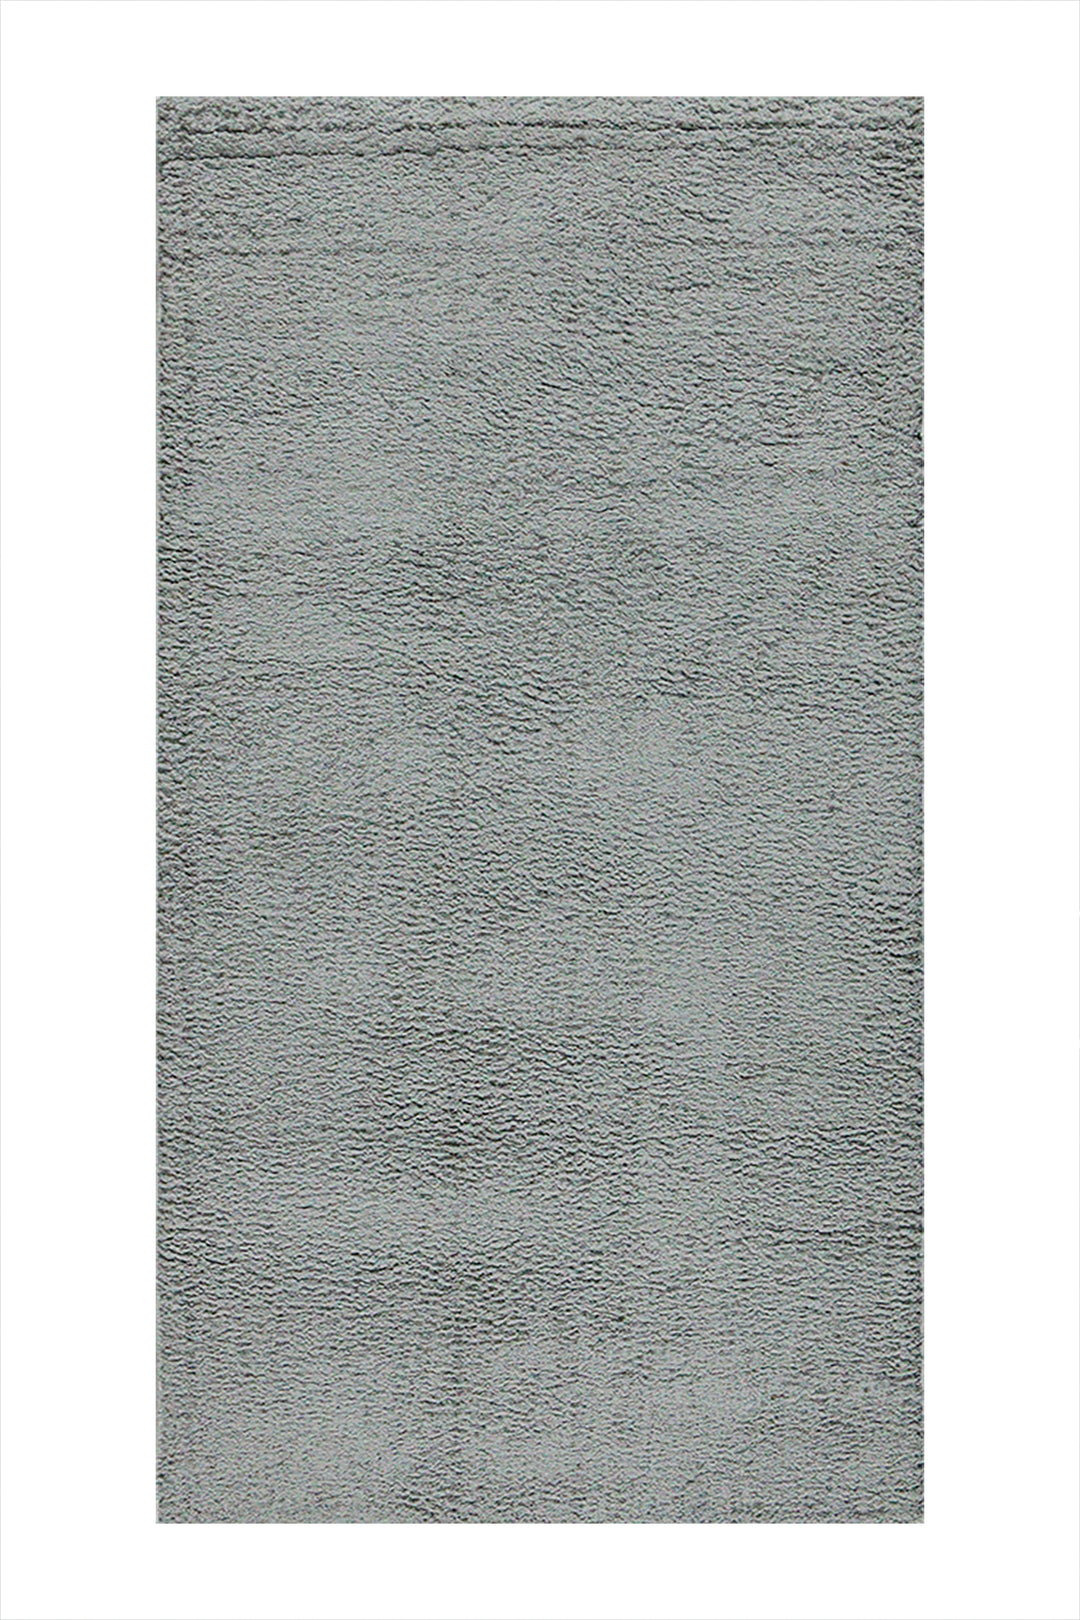 Turkish Modern Festival WD Rug - 2.5 x 3.4 FT - Gray - Sleek and Minimalist for Chic Interiors